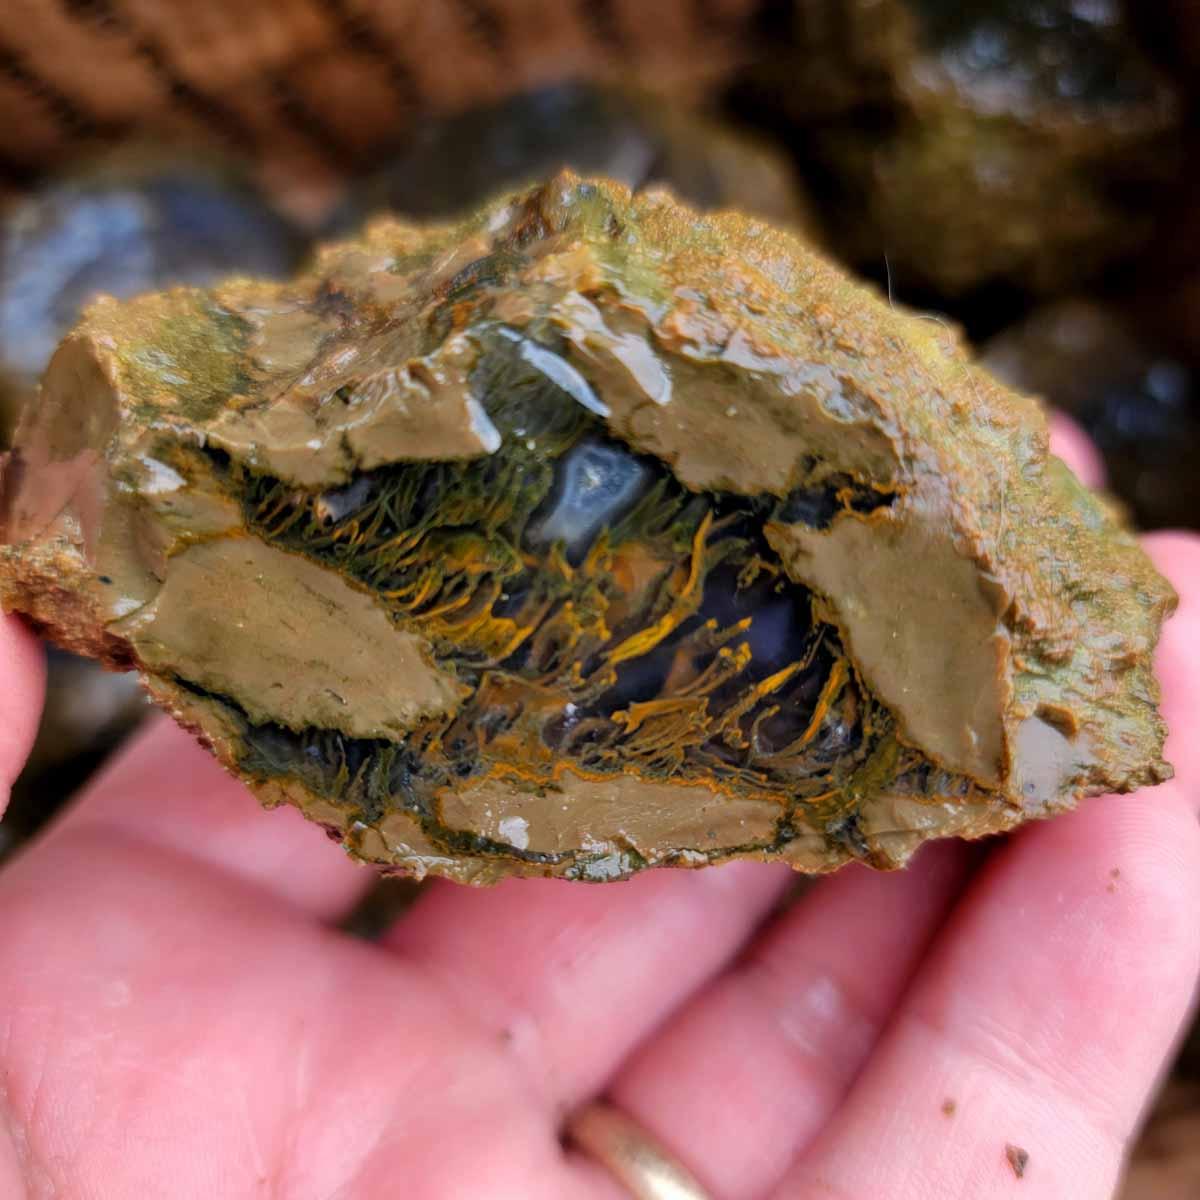 Priday Richardson Moss Bed Thunderegg Cutting Rough Flatrate! - Lapidary Central